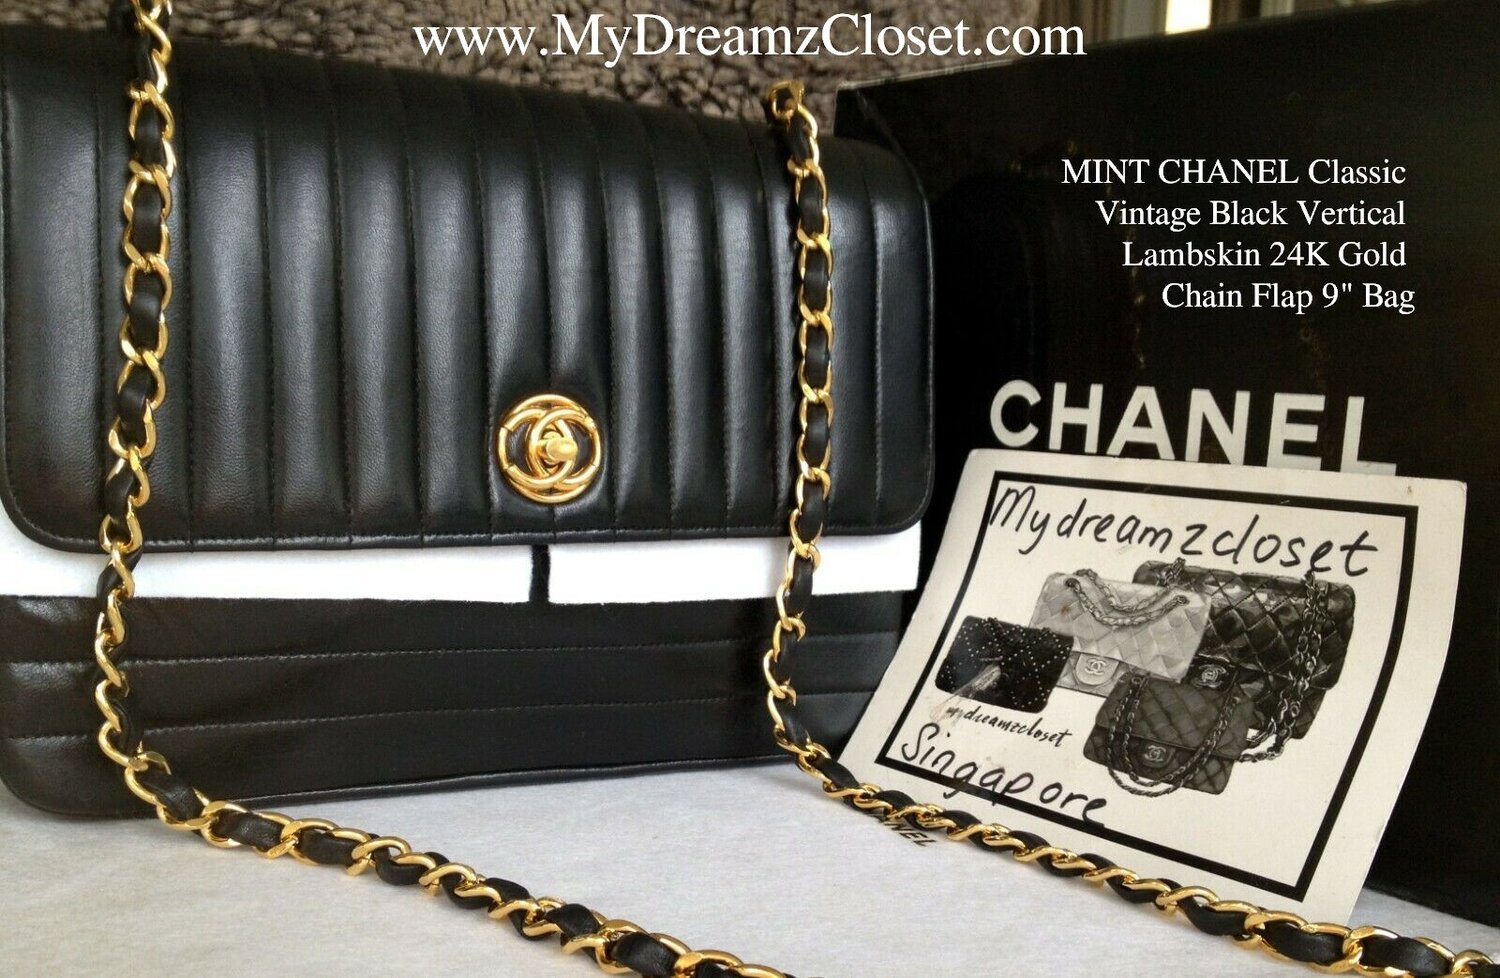 NEW CHANEL 19 BLACK GOLD QUILTED LEATHER LONG FLAP WALLET